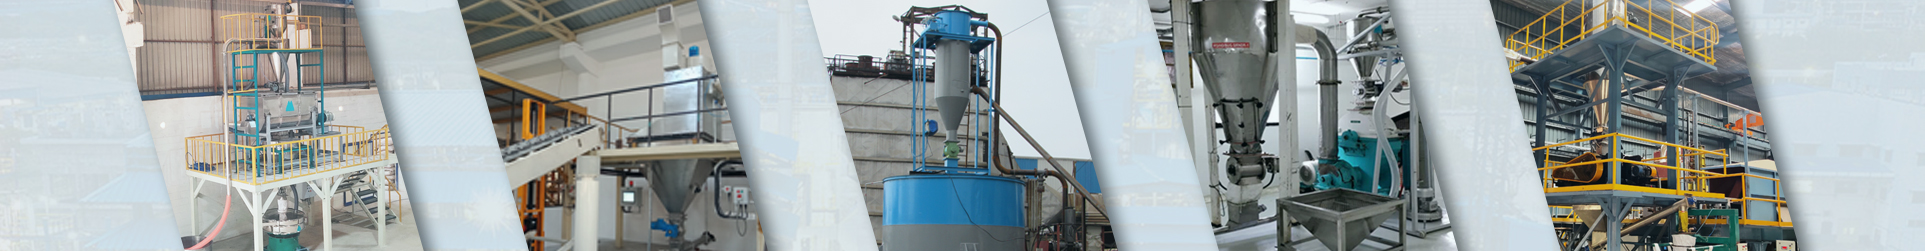 Vacuum And Pneumatic Conveying System